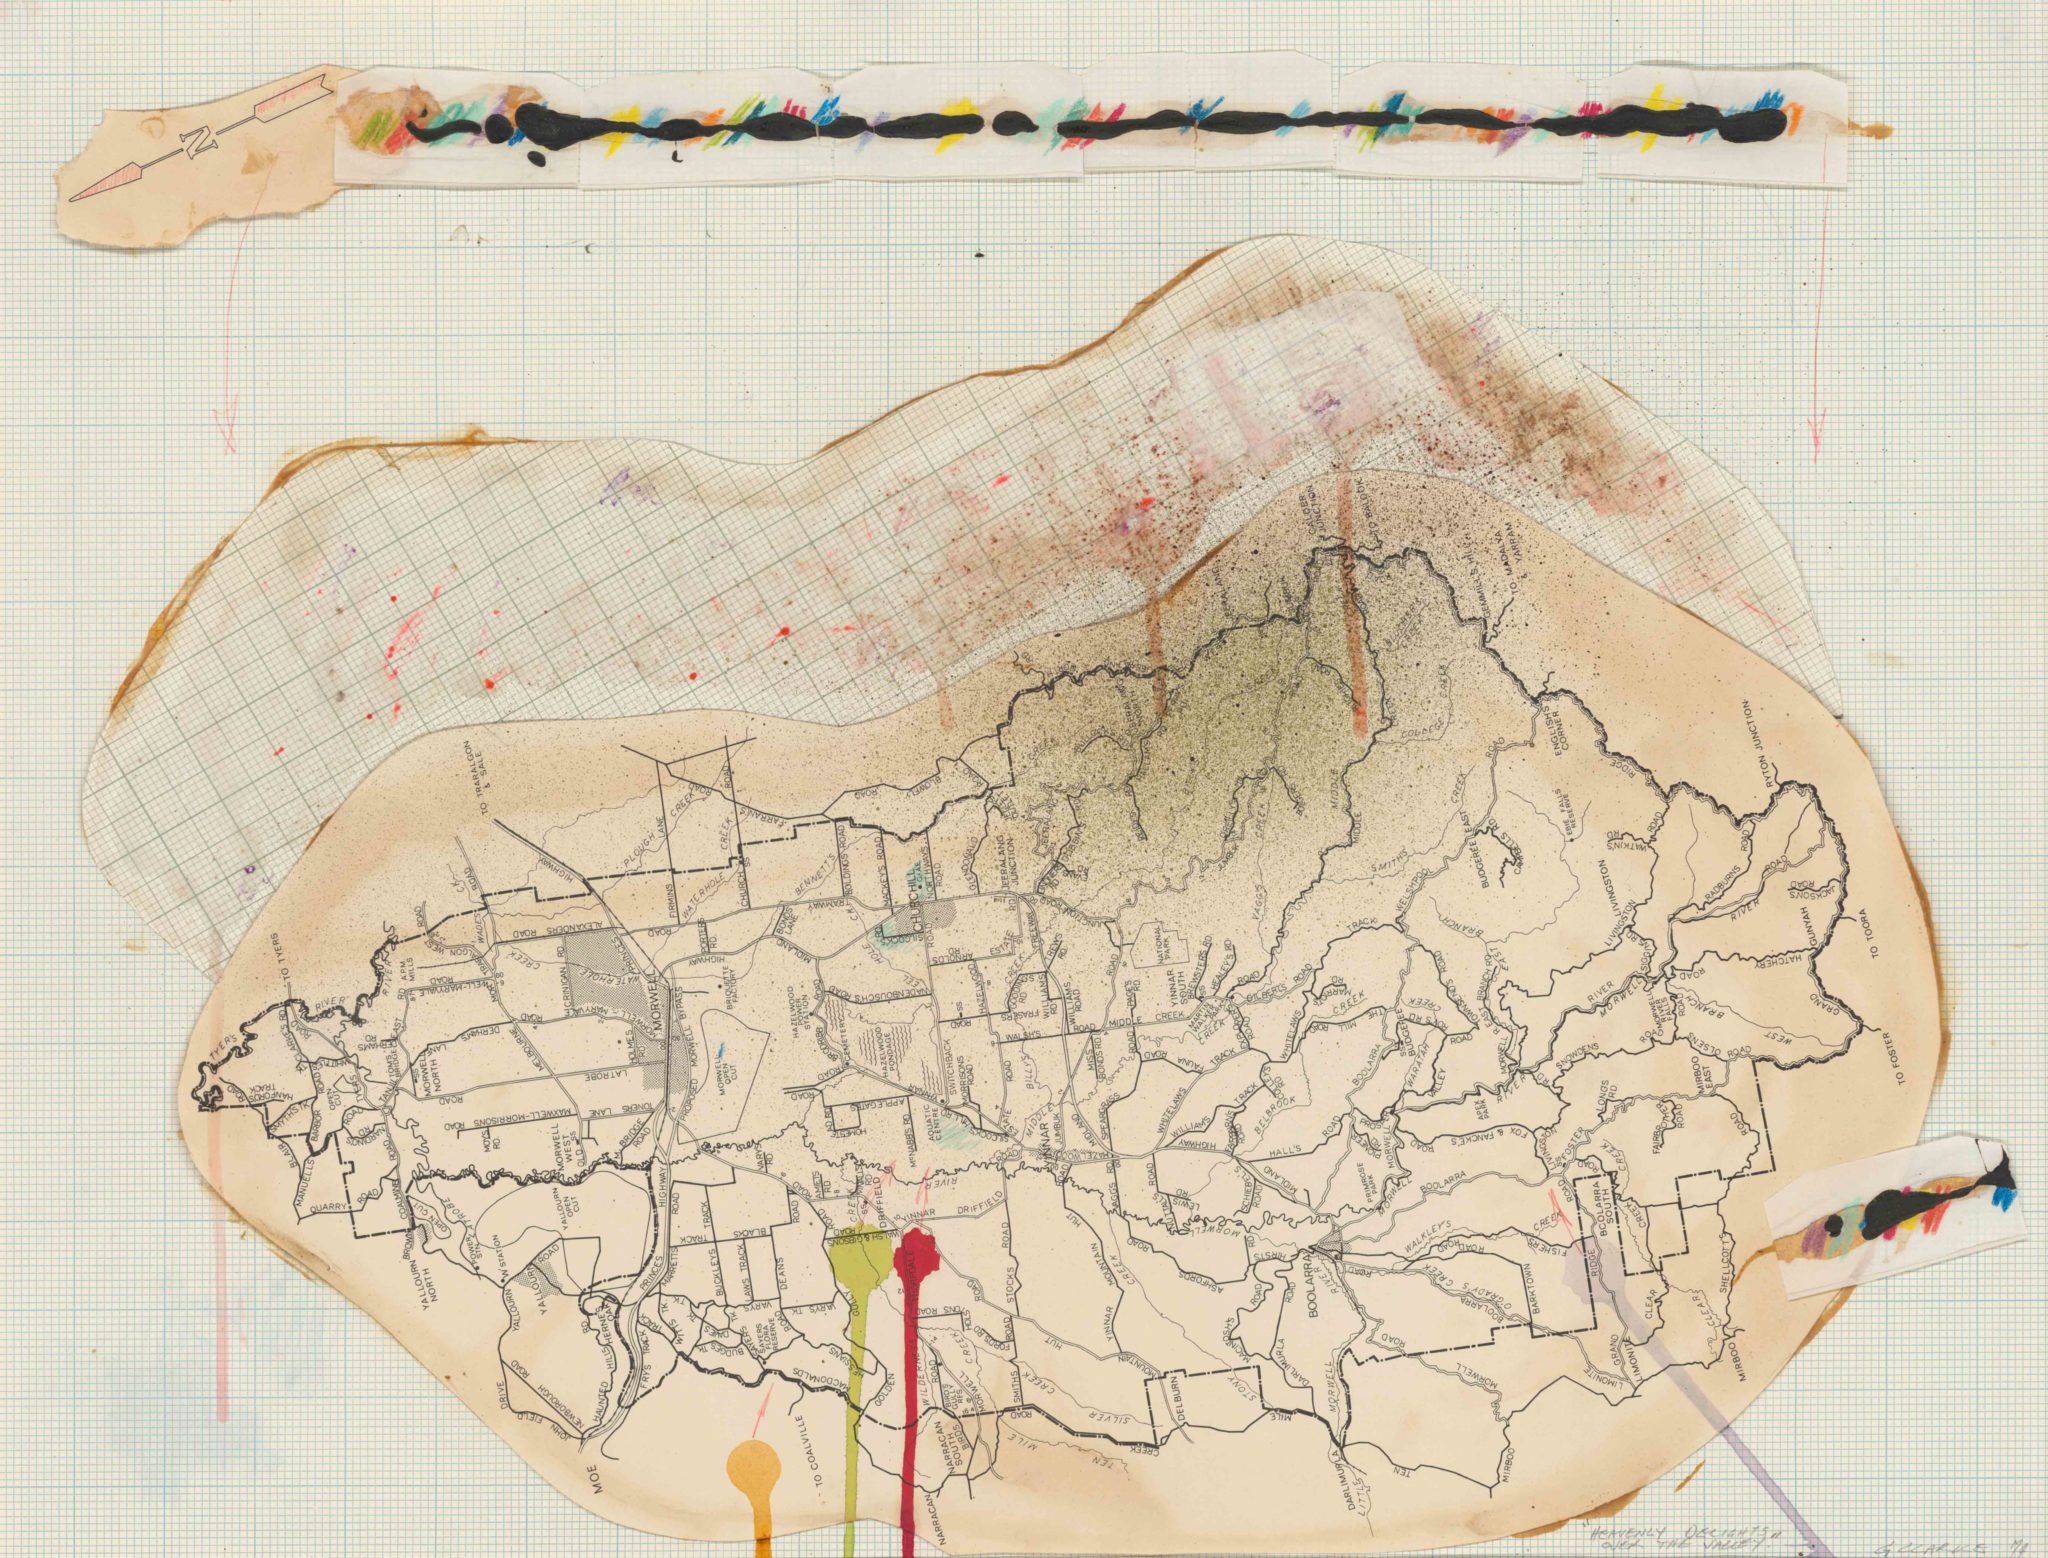 Glen Clarke, Heavenly Delights Over the Valley, 1974, Painted collage on graph paper and tissue paper, 48 x 63 cm, Latrobe Regional Gallery Collection, purchased 1974.